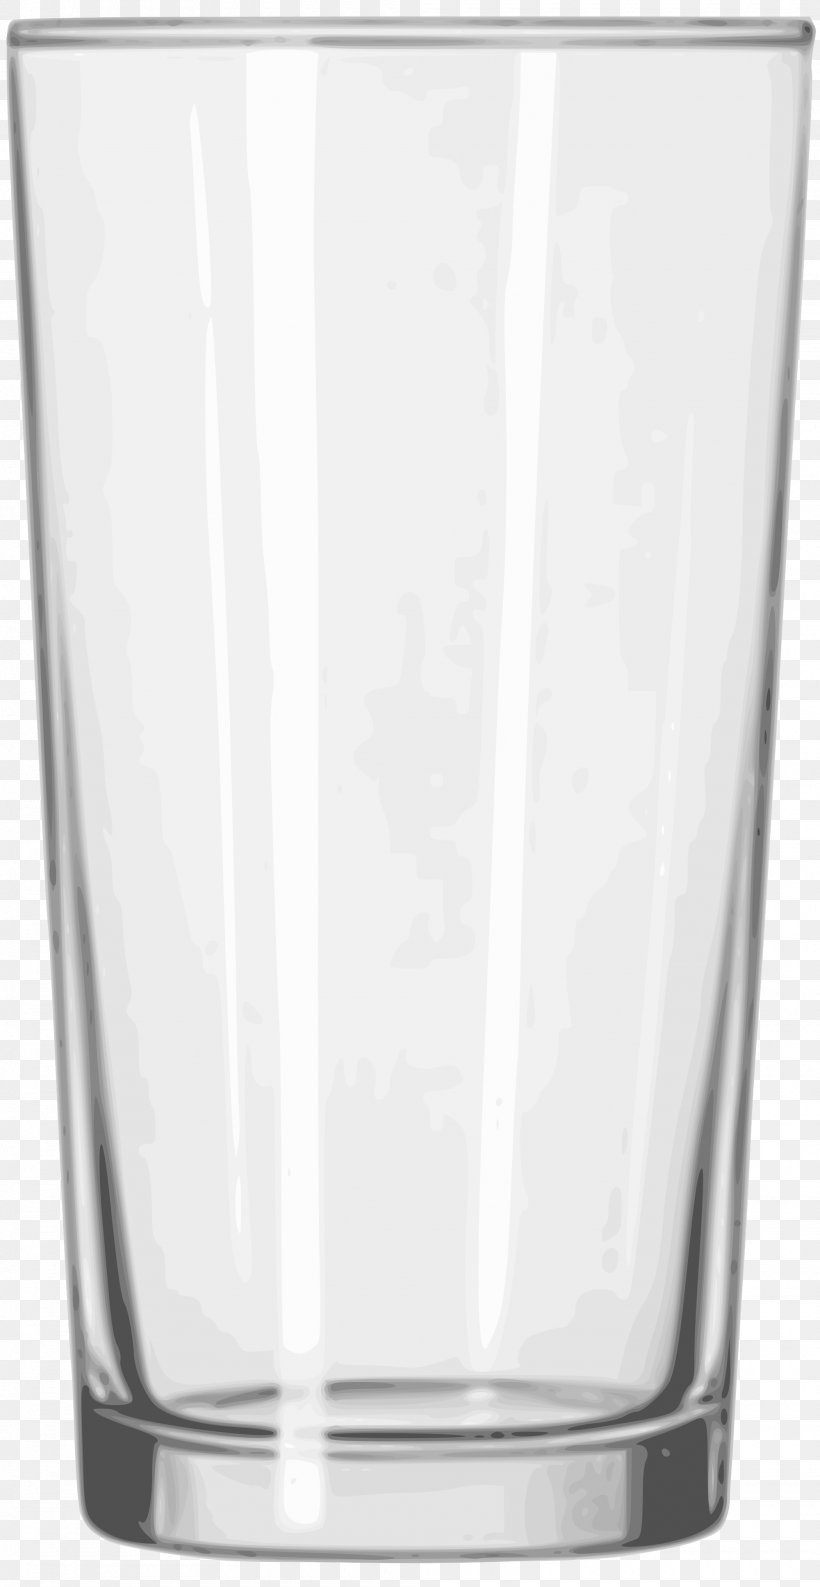 Iced Tea Glass Cup Tumbler, PNG, 2000x3871px, Tea, Beer Glass, Beer Glassware, Cocktail Glass, Cup Download Free